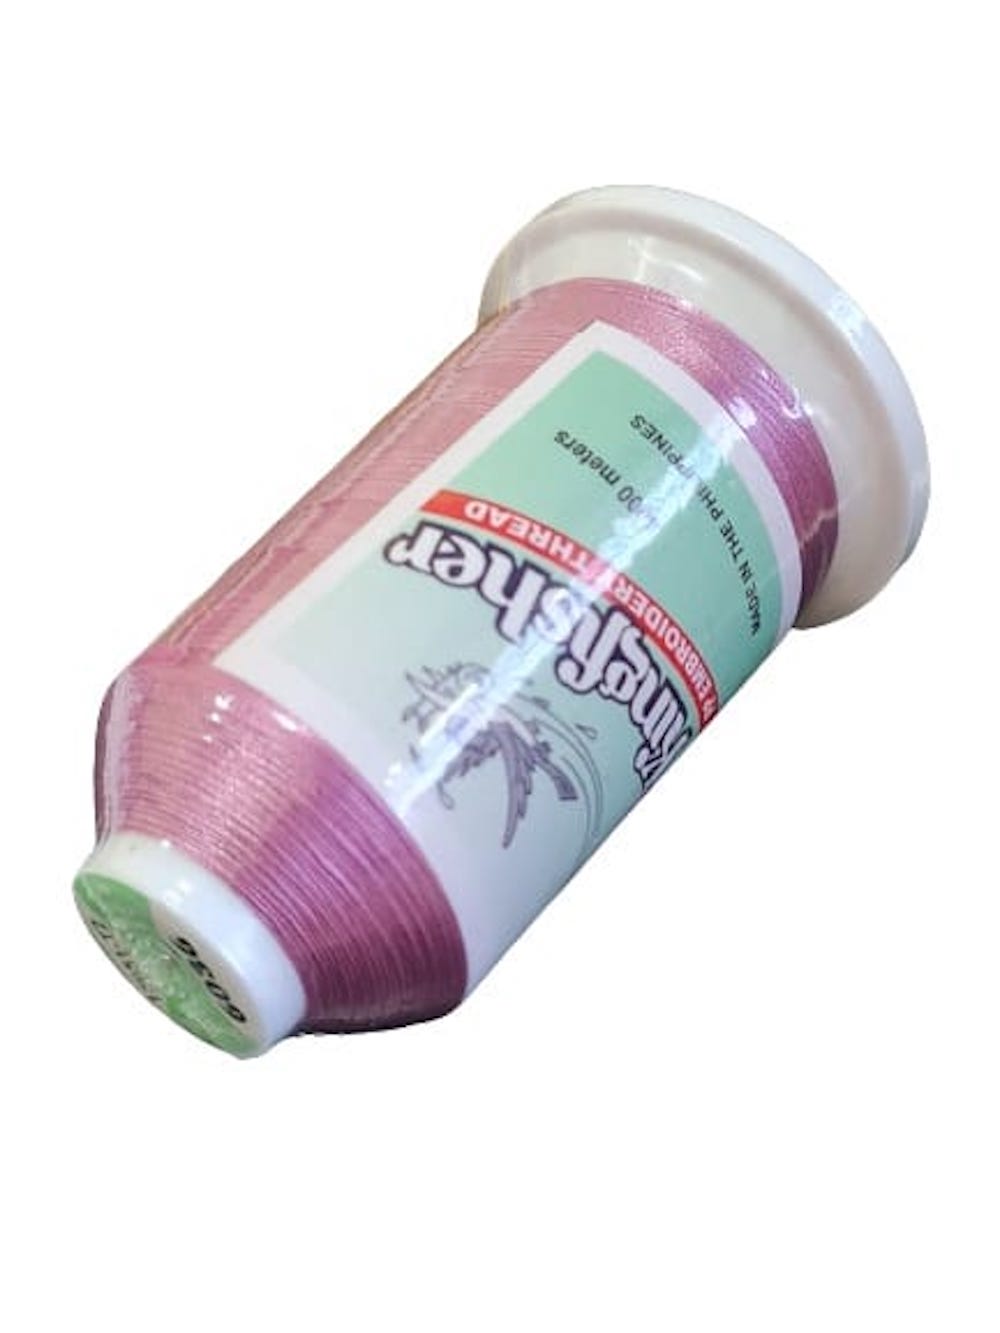 King Fisher Embroidery Thread 4000m 6036 - MY SEWING MALL